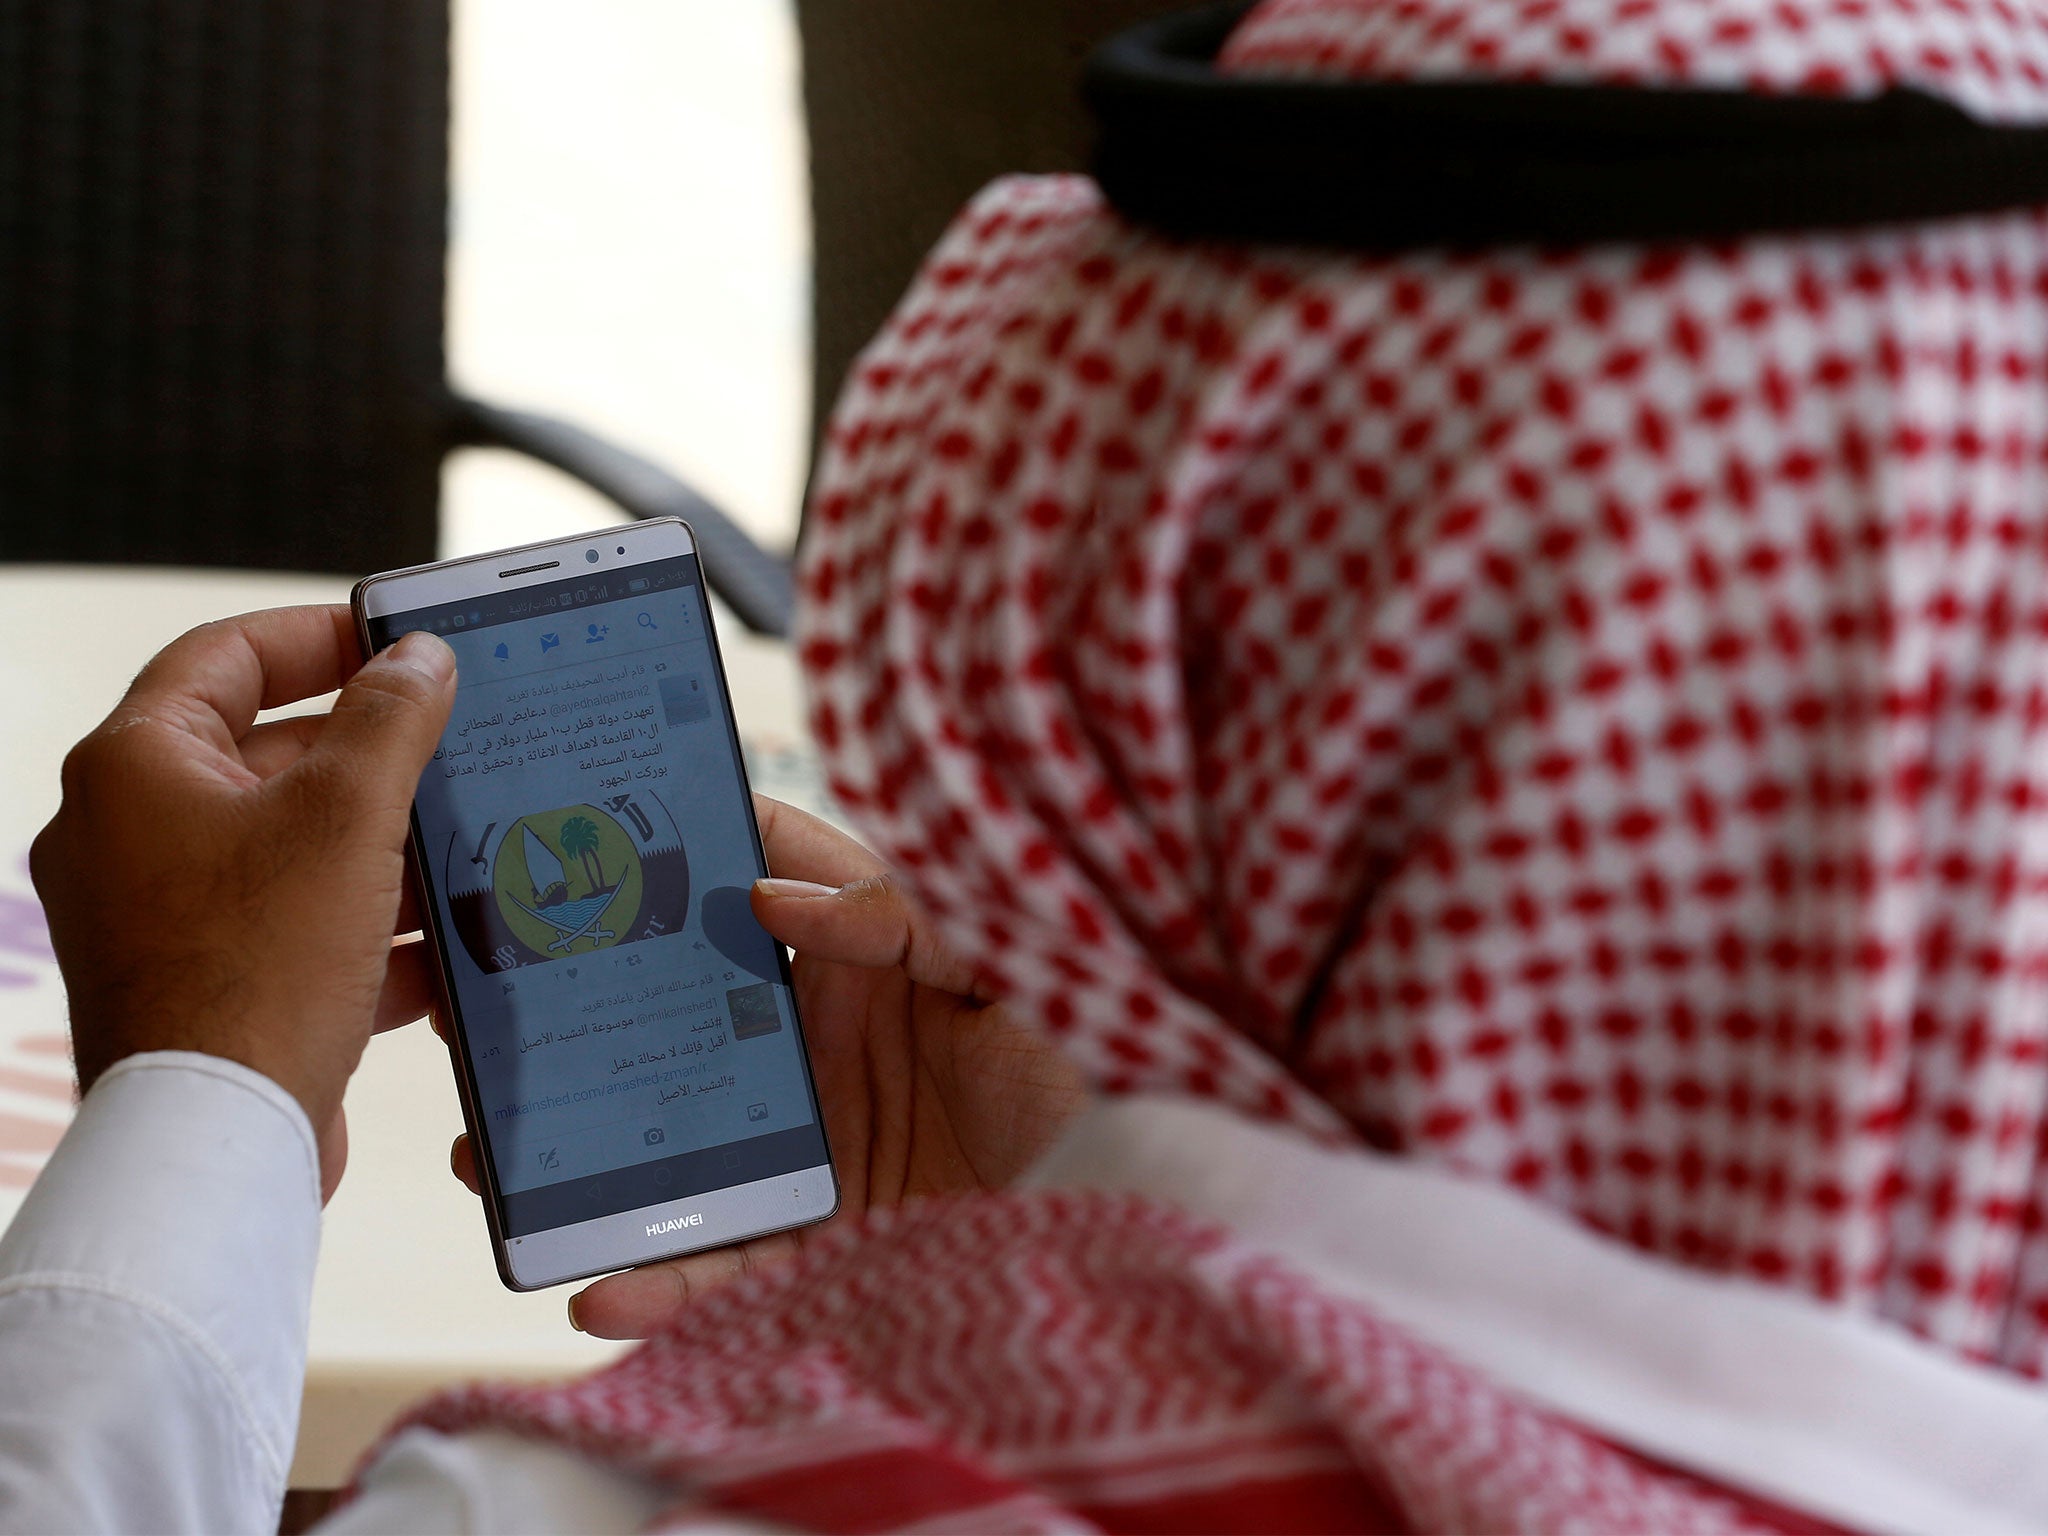 Saudi Arabians are among the biggest social media users in the Middle East